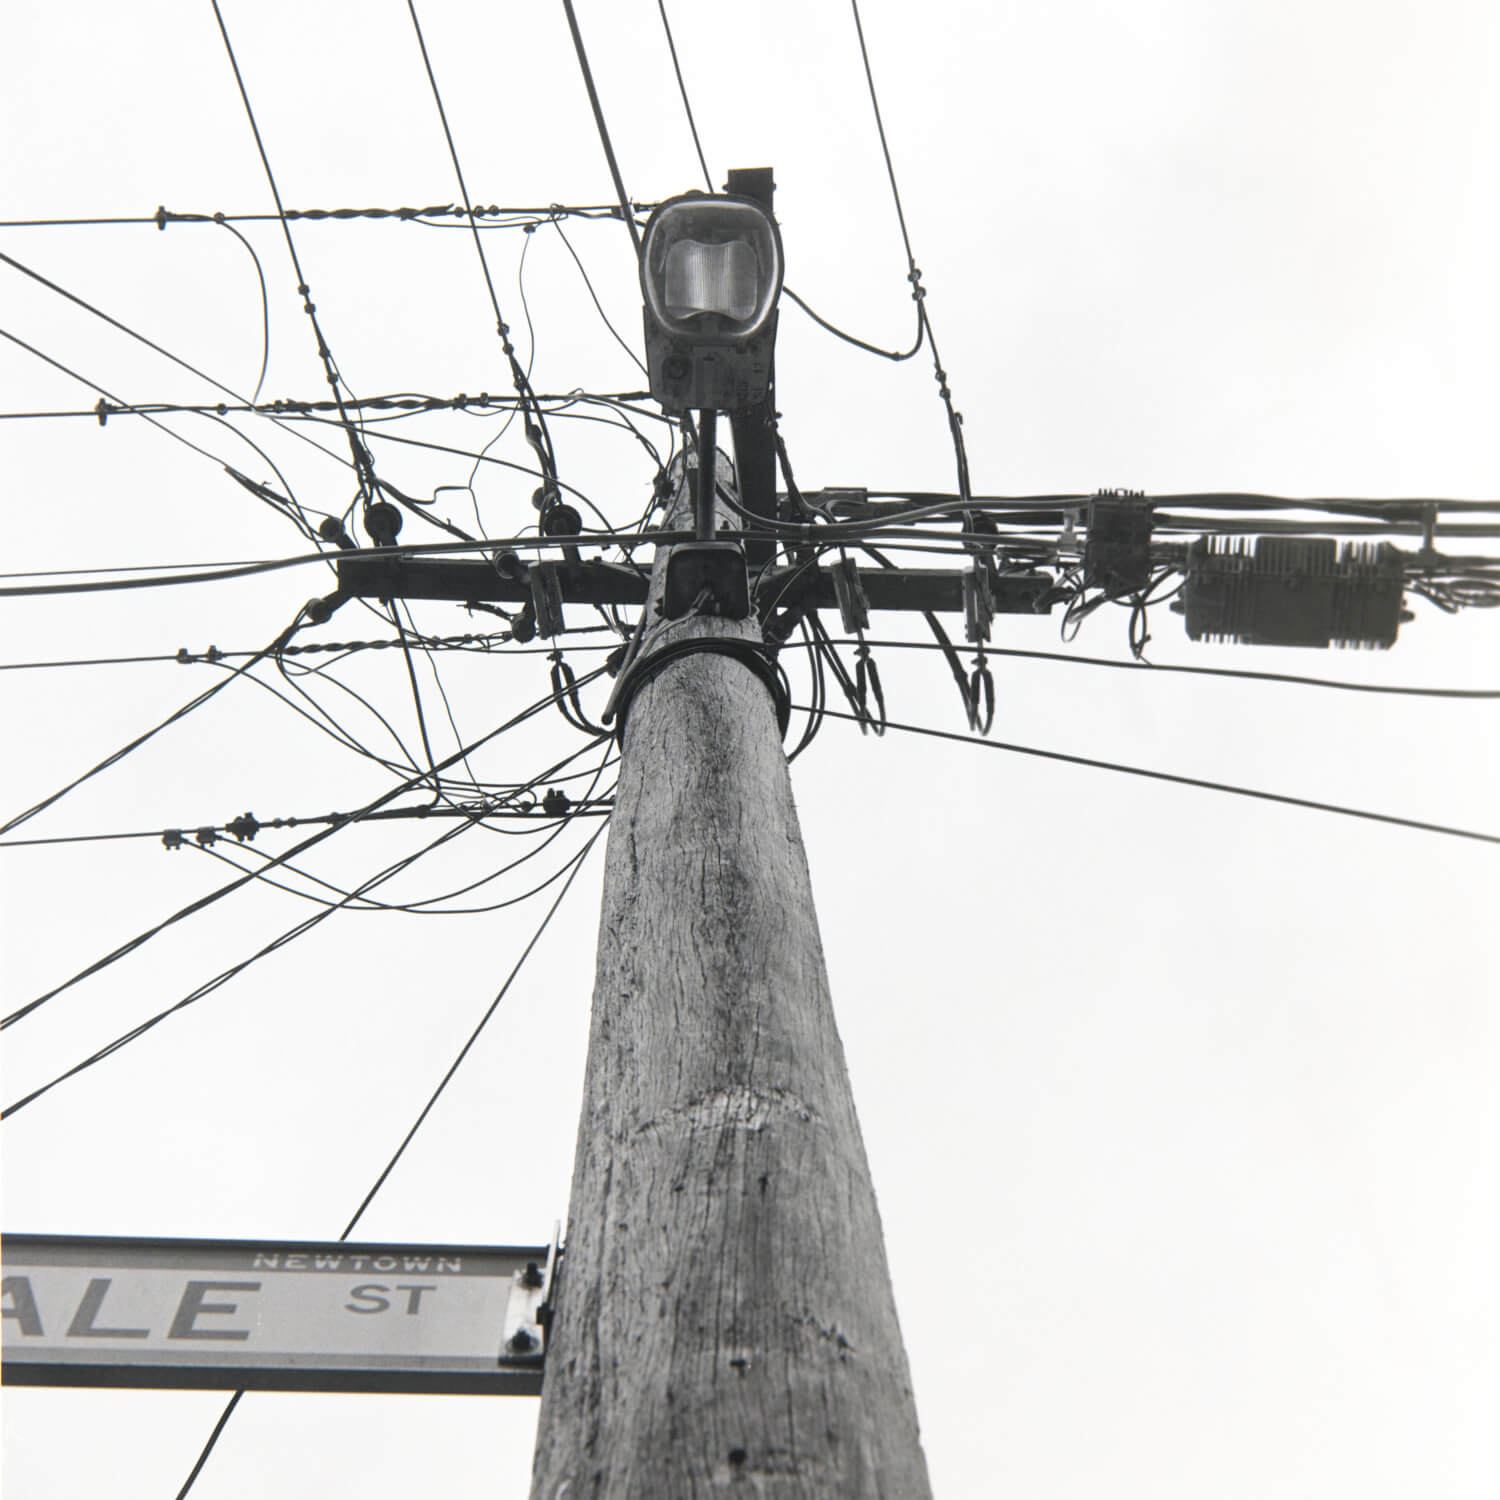 Local pole, Mamiya c330 with 40mm lens on T-max 100 (home dev and scan)